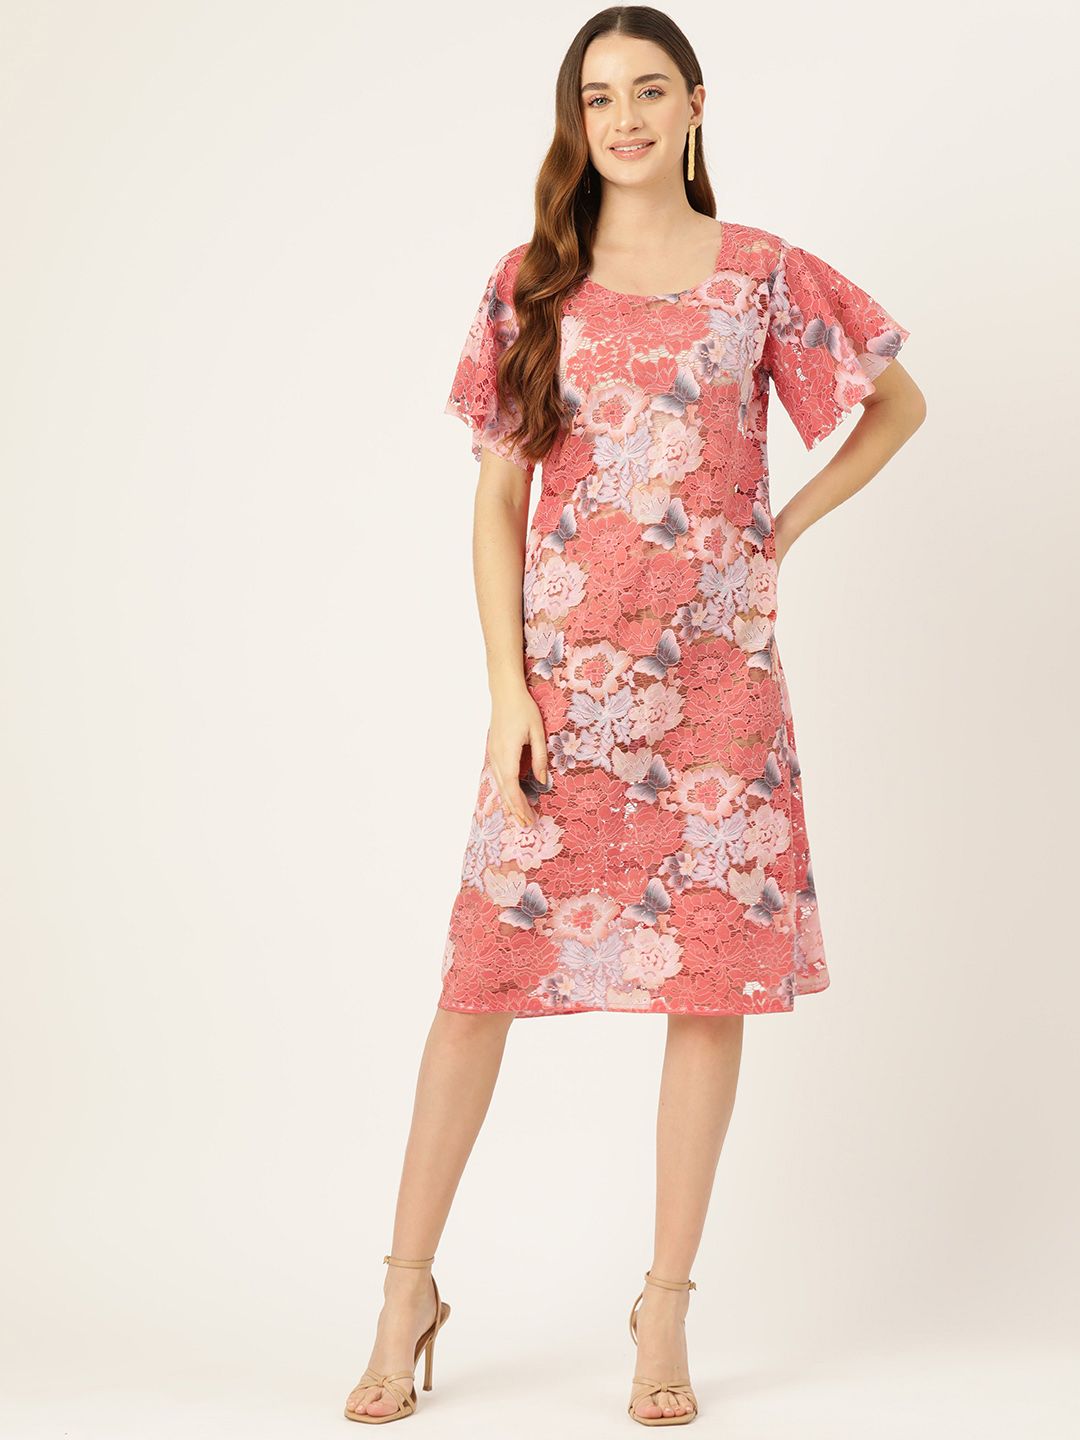 Simaaya Pink Floral Flared Sleeve A-Line Dress Price in India